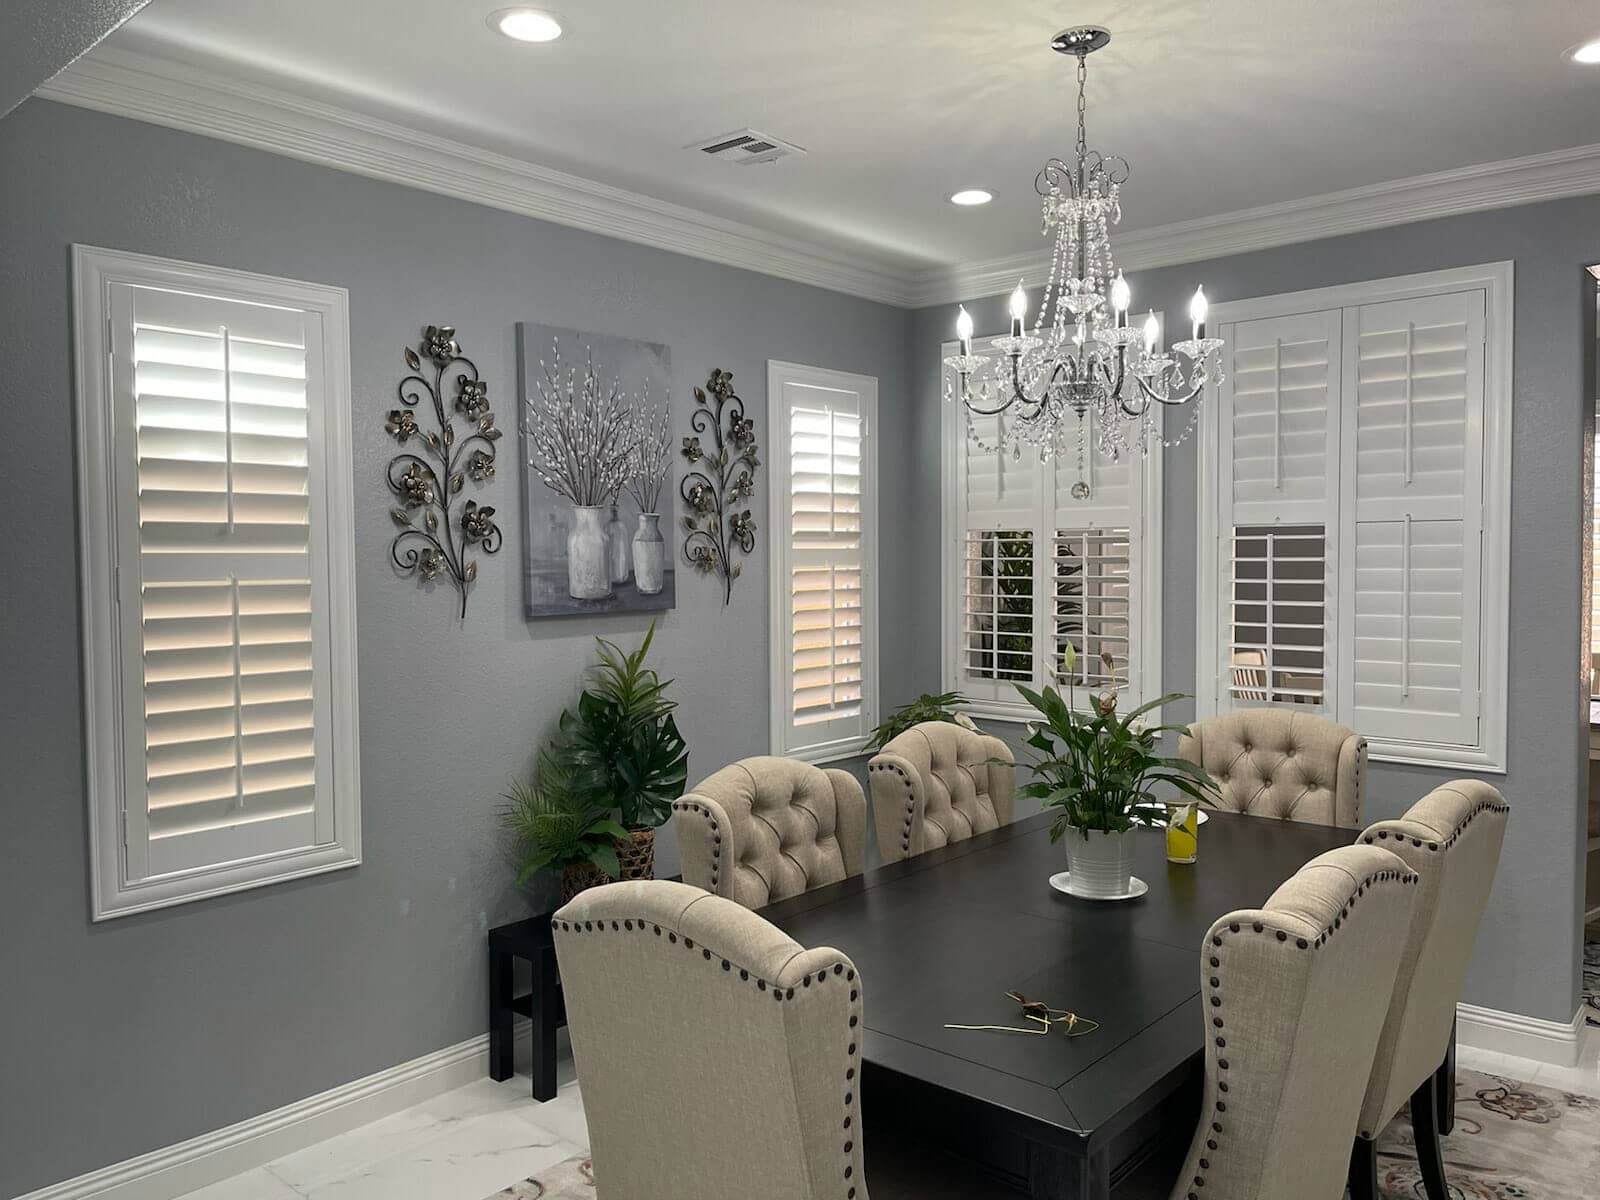 Shutters close tighter and block more light than any other window covering!